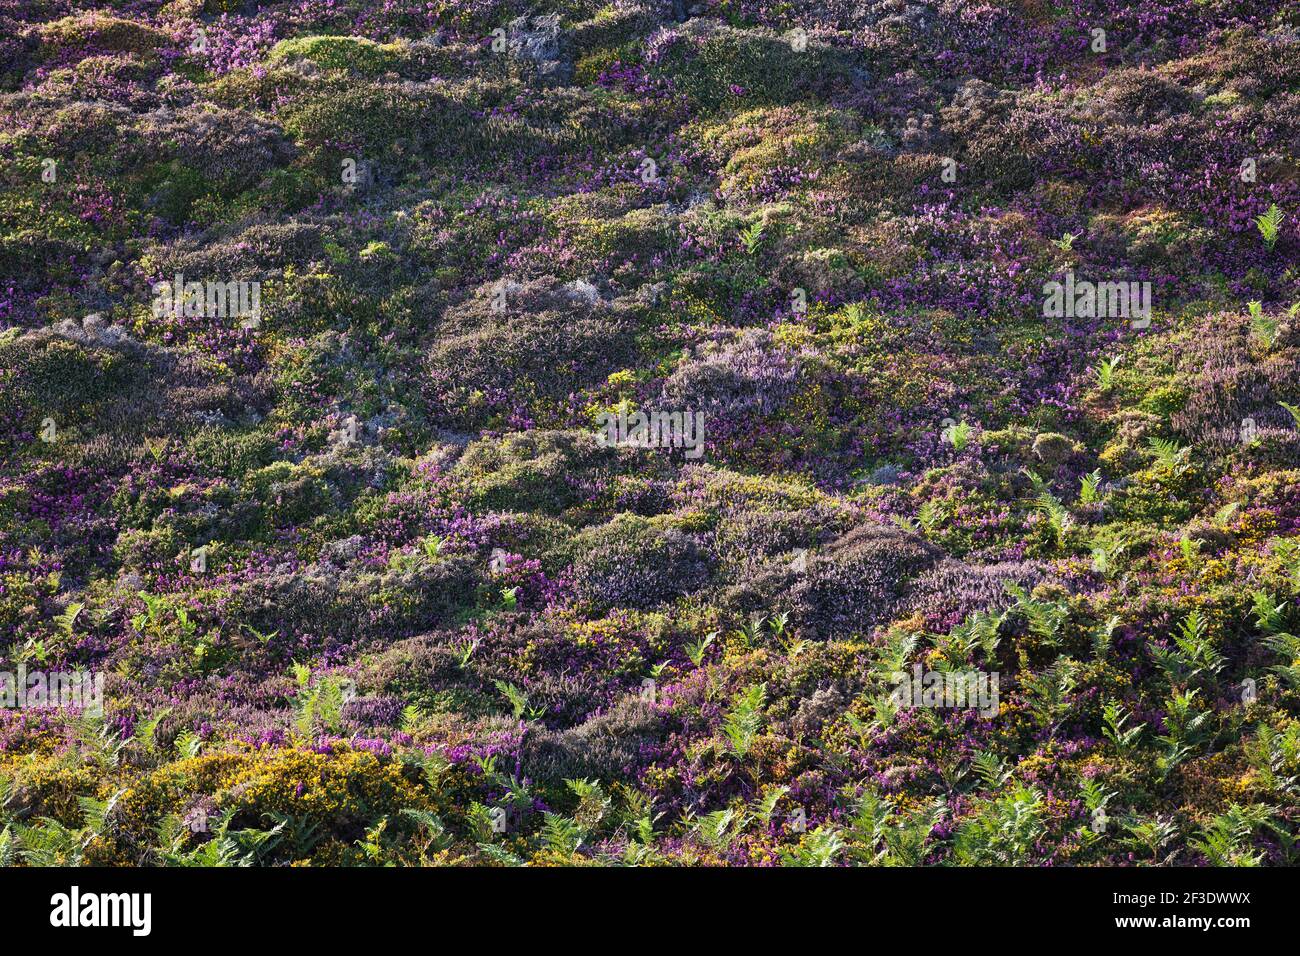 Heath Landscape in warm evening light on the Cap Frehel, Brittany, France Europe Stock Photo